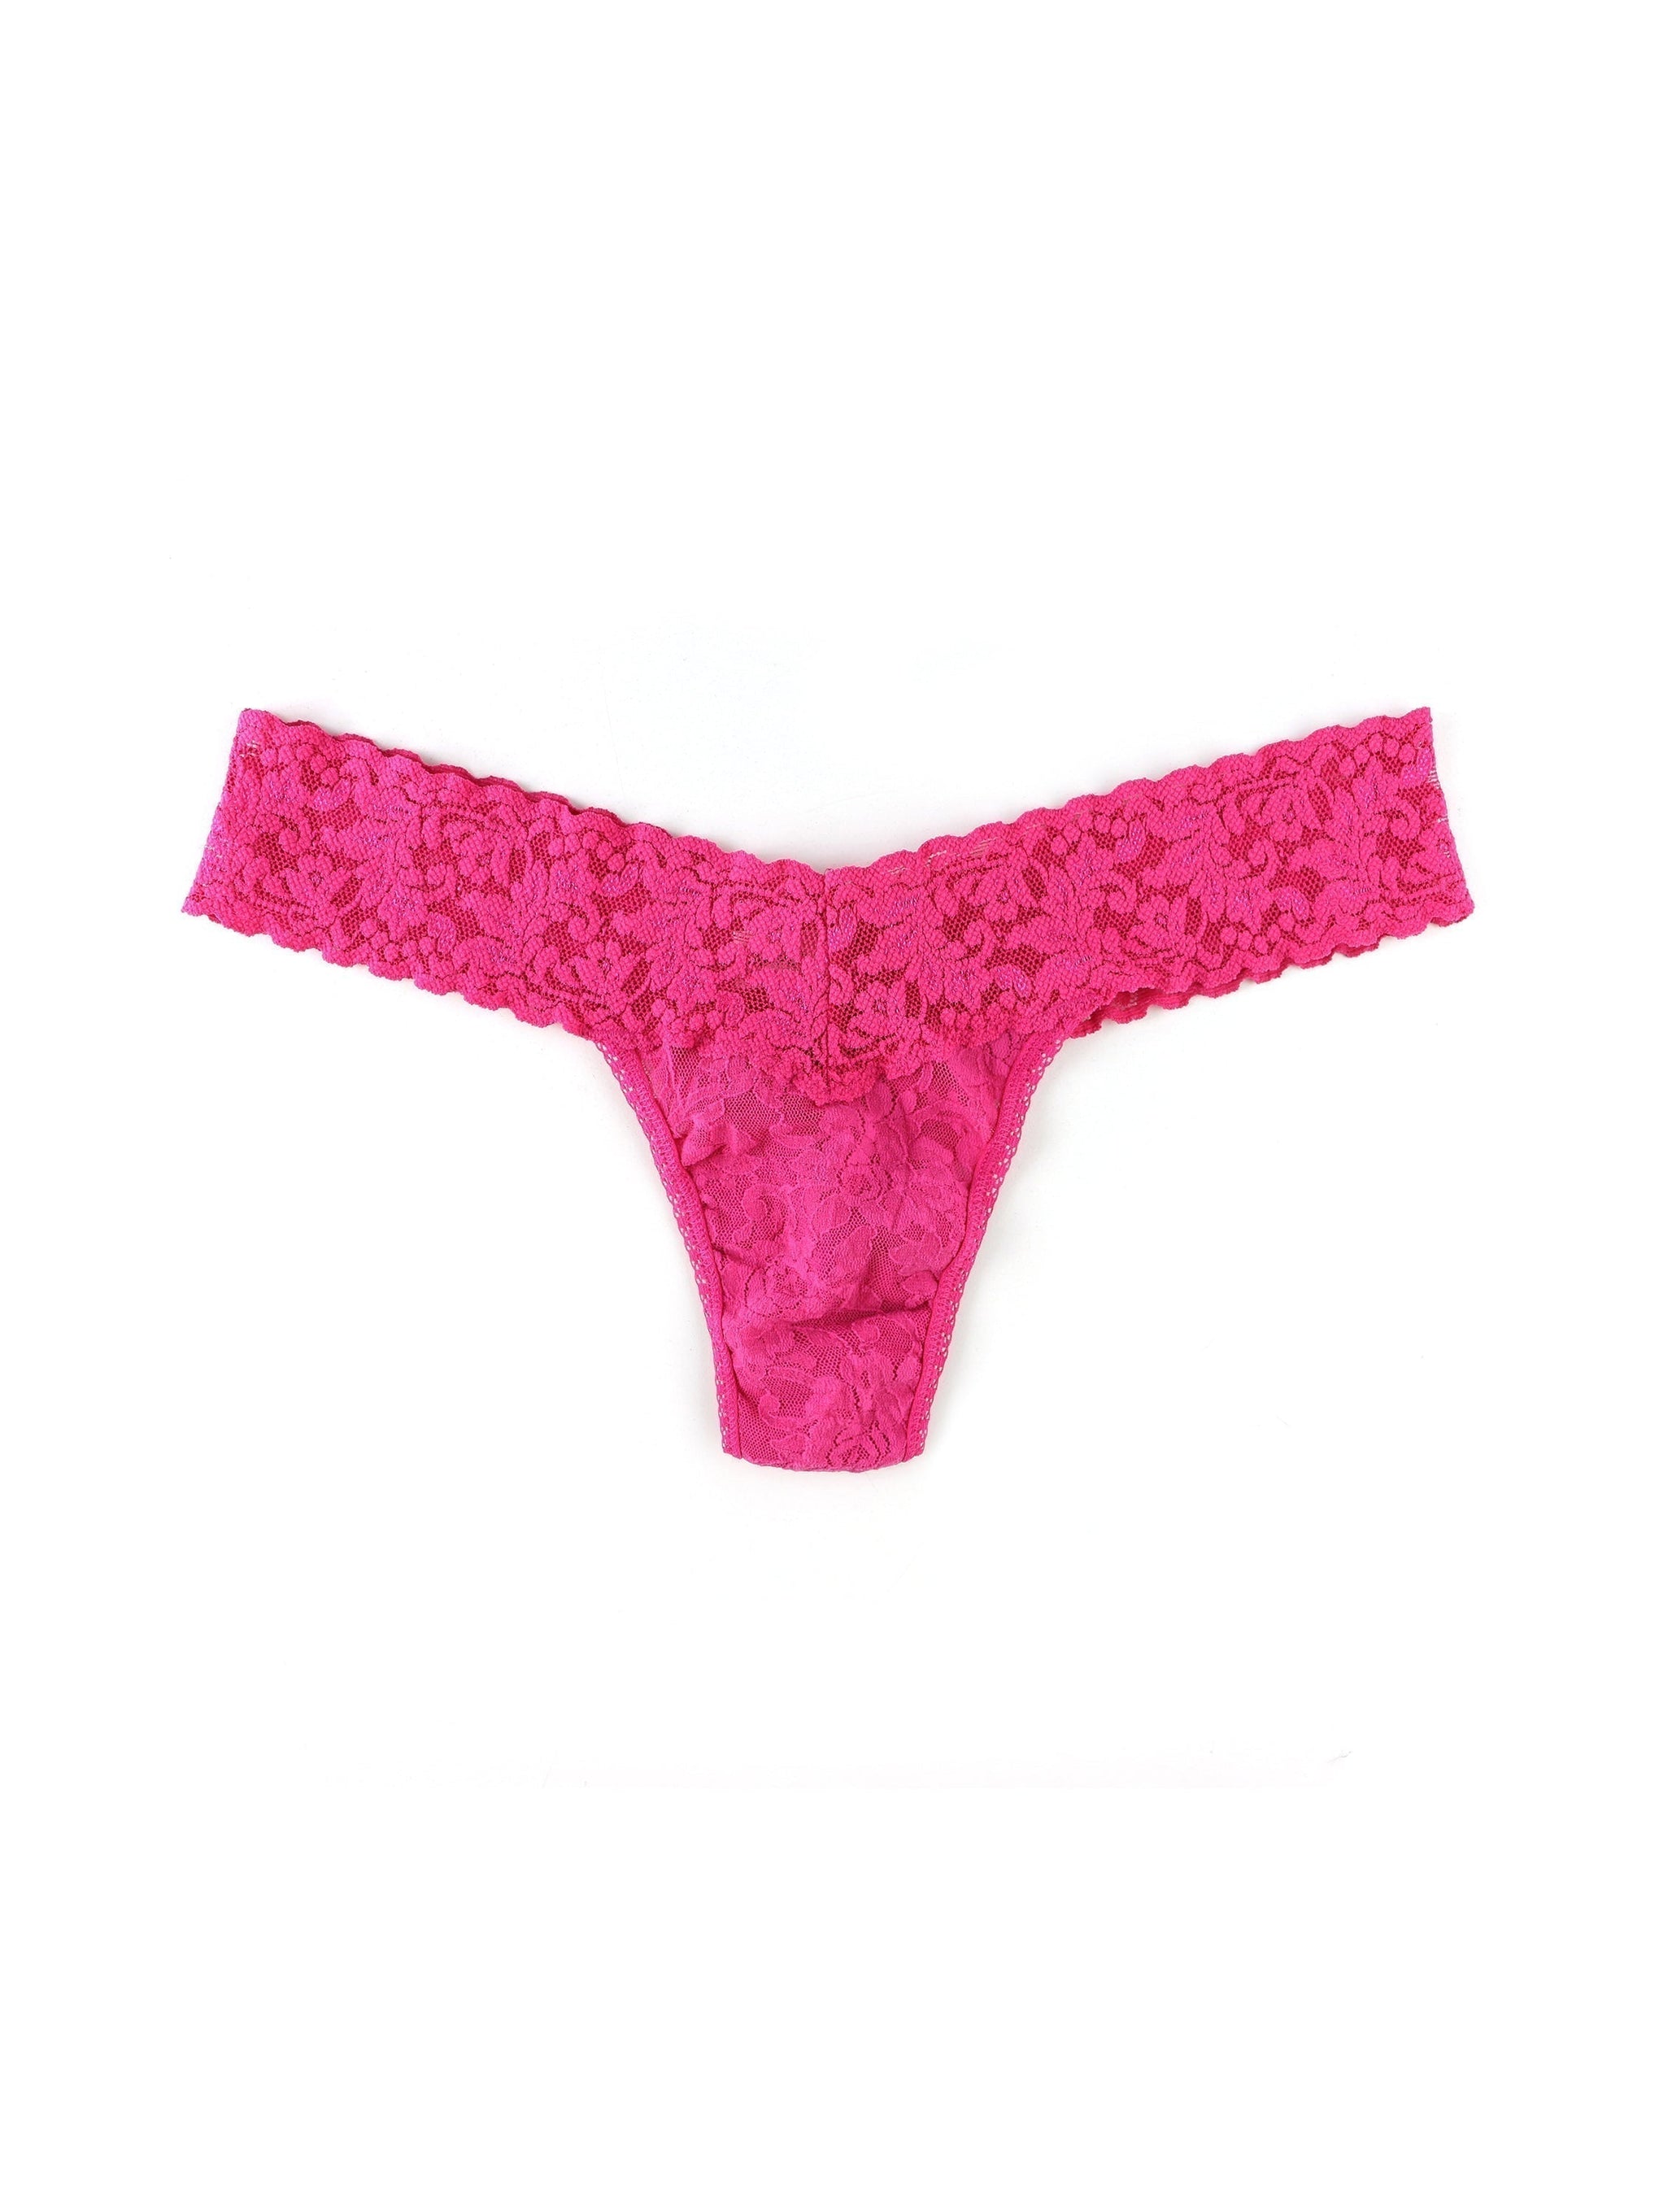 PINK Lace Strappy Thong, Women's Fashion, Watches & Accessories